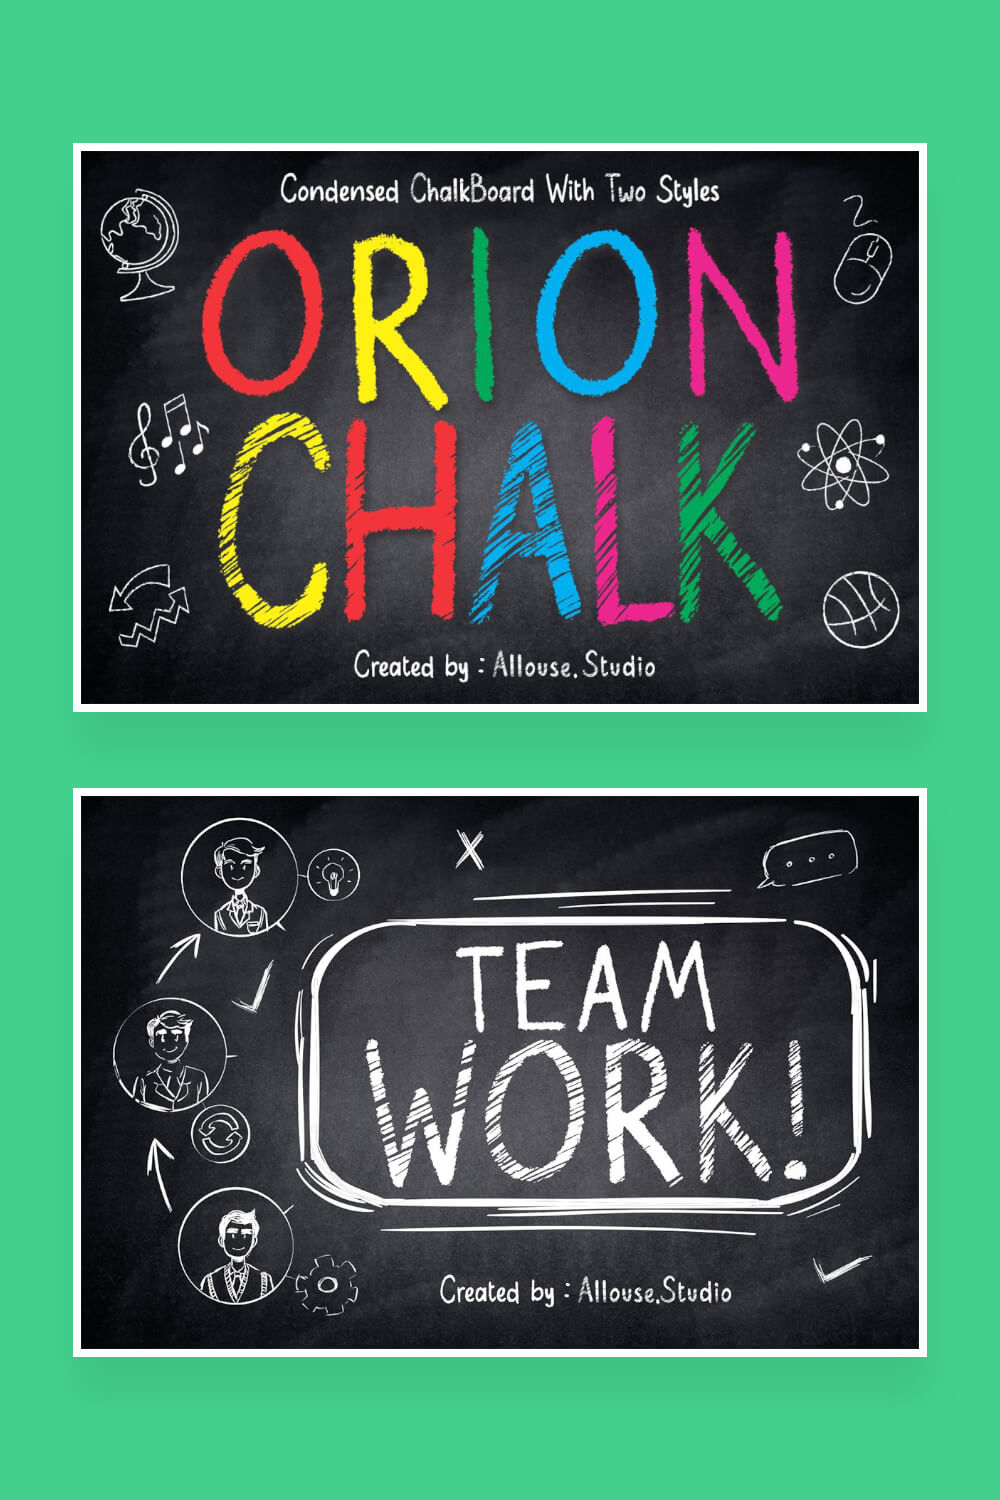 orion two styles condensed chalkboard font pinterest image.